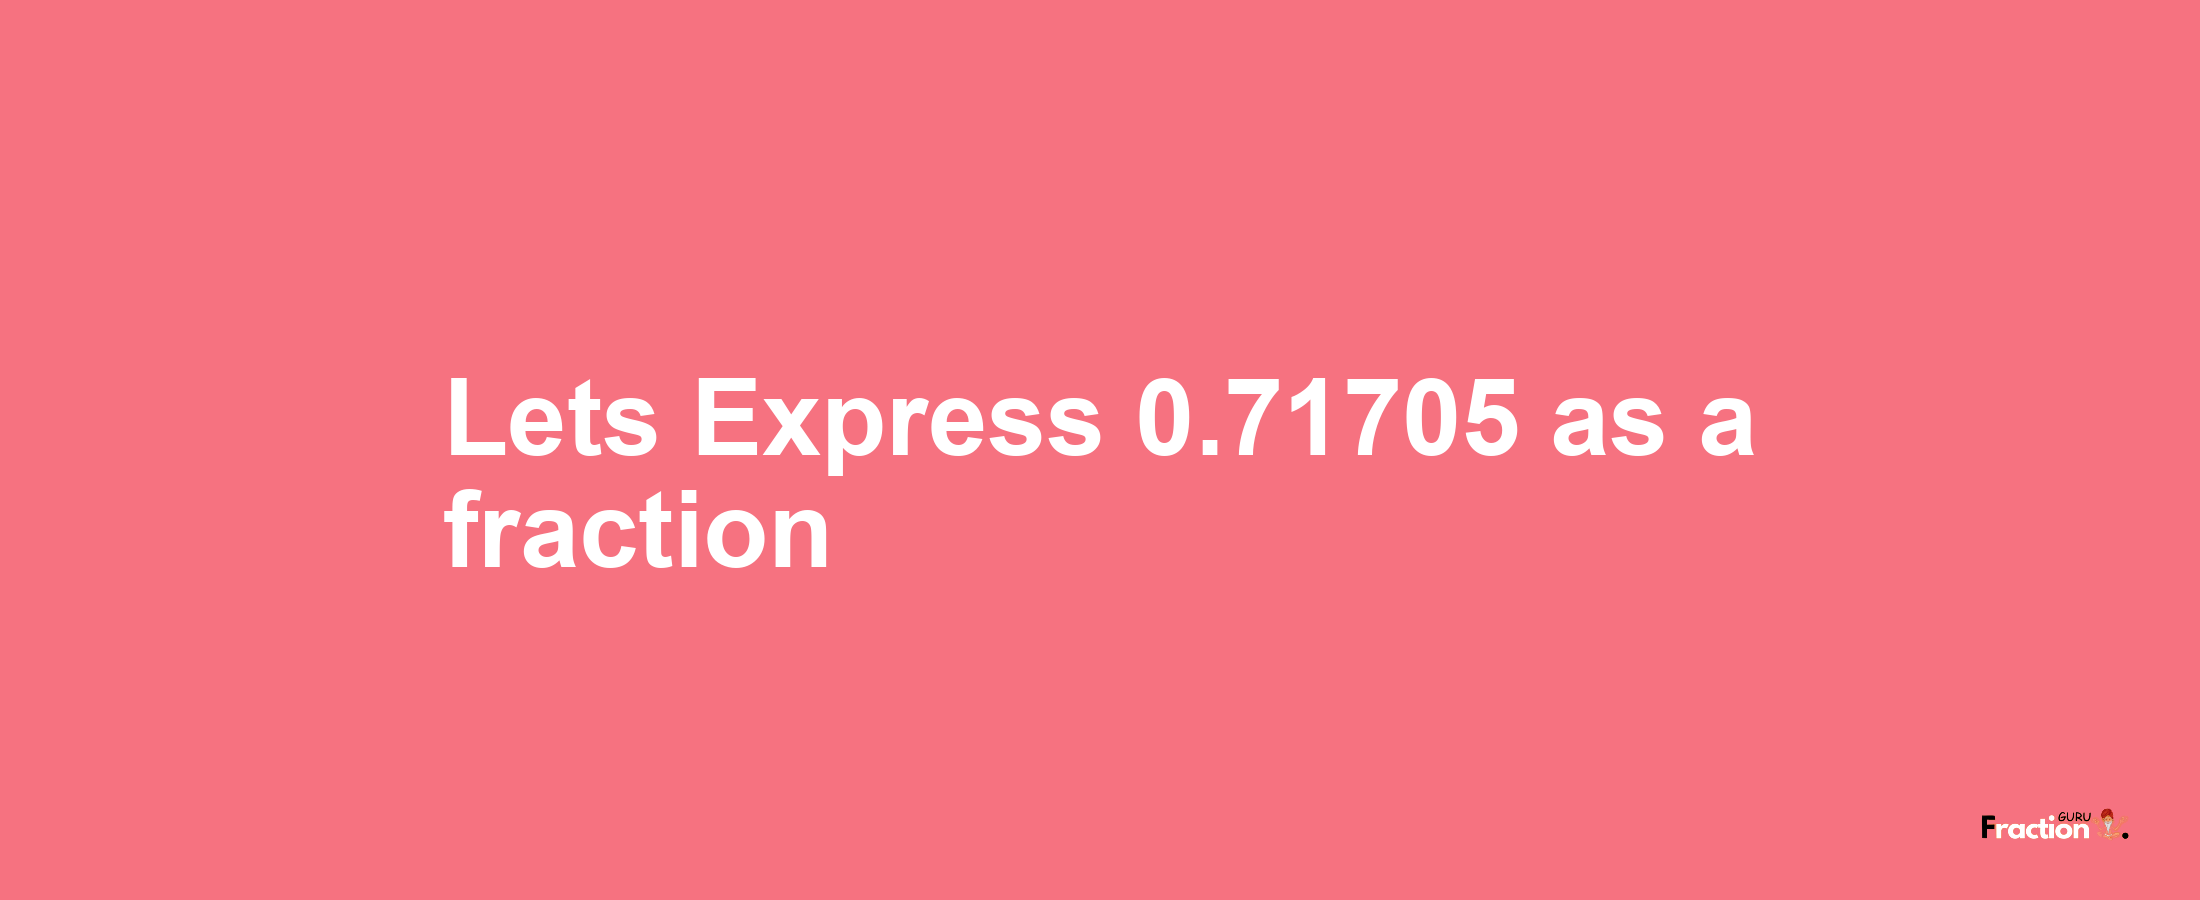 Lets Express 0.71705 as afraction